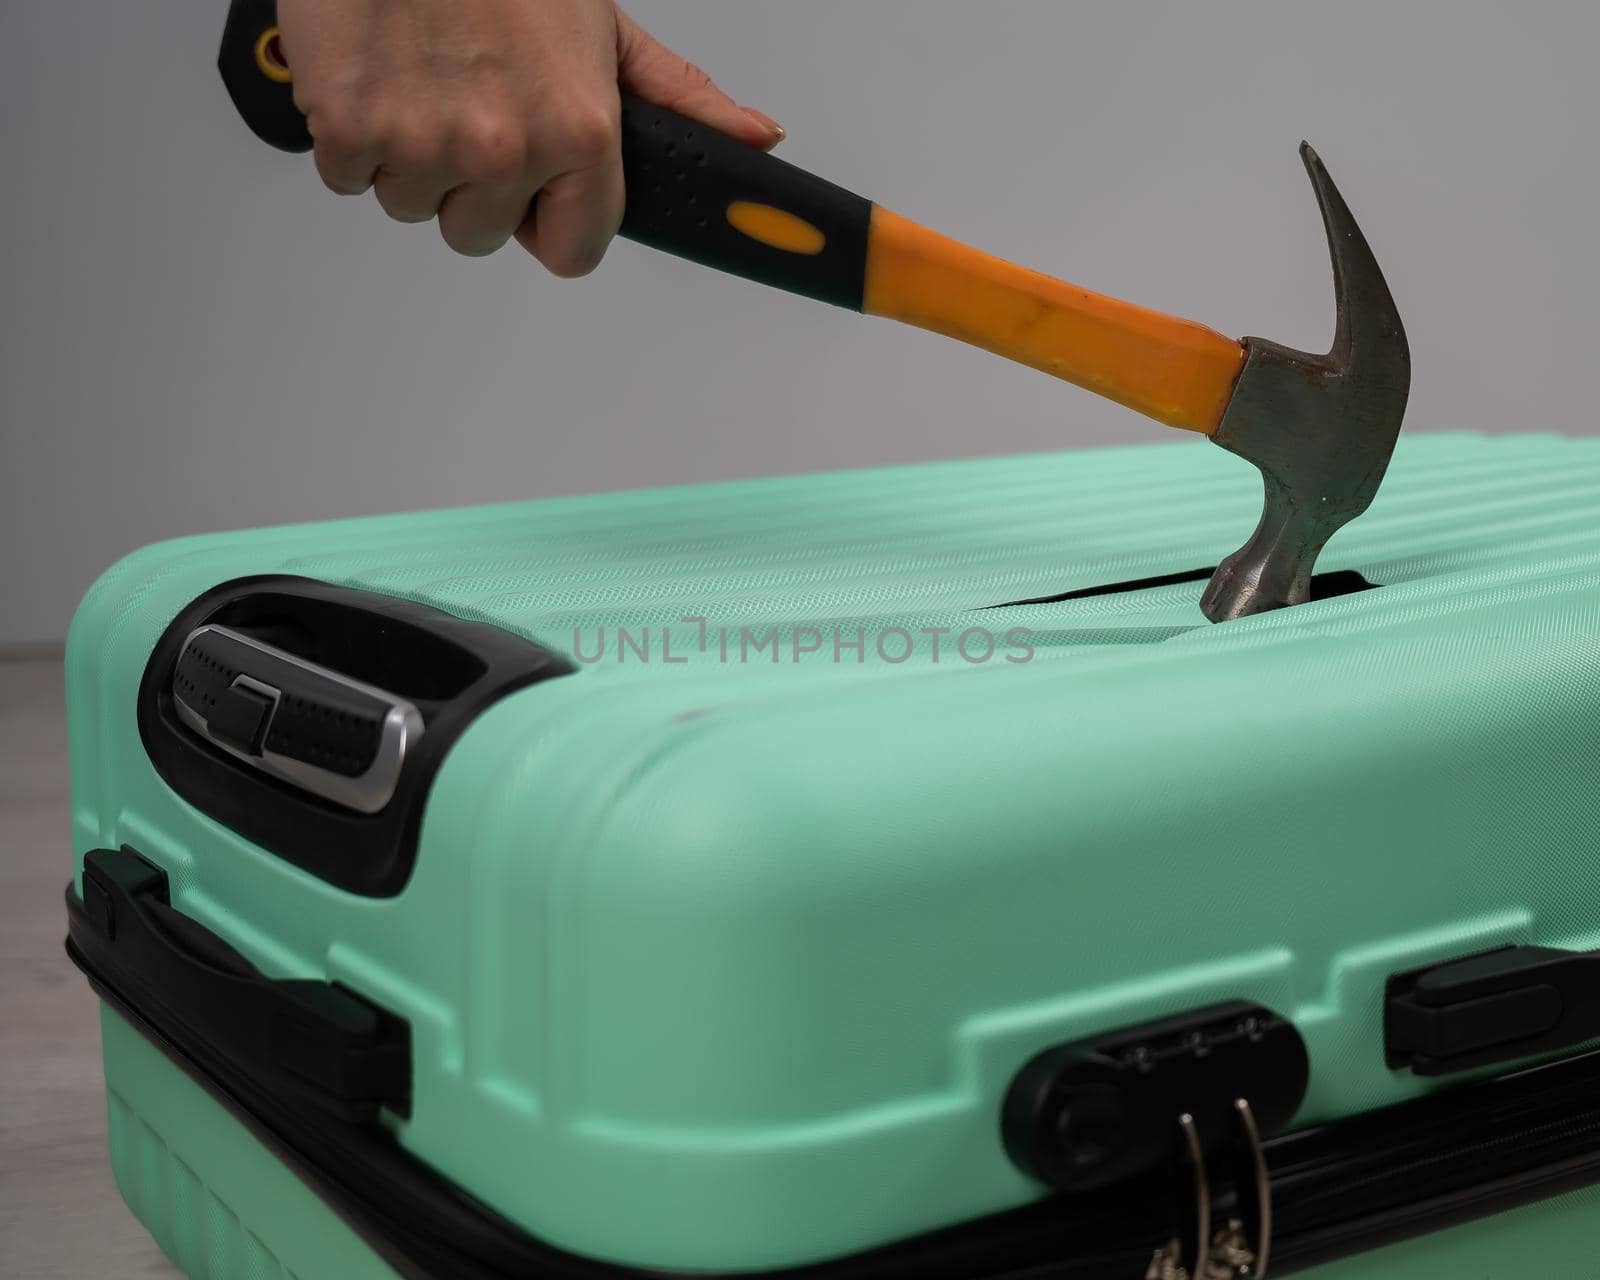 A woman hits a suitcase with a hammer on a white background